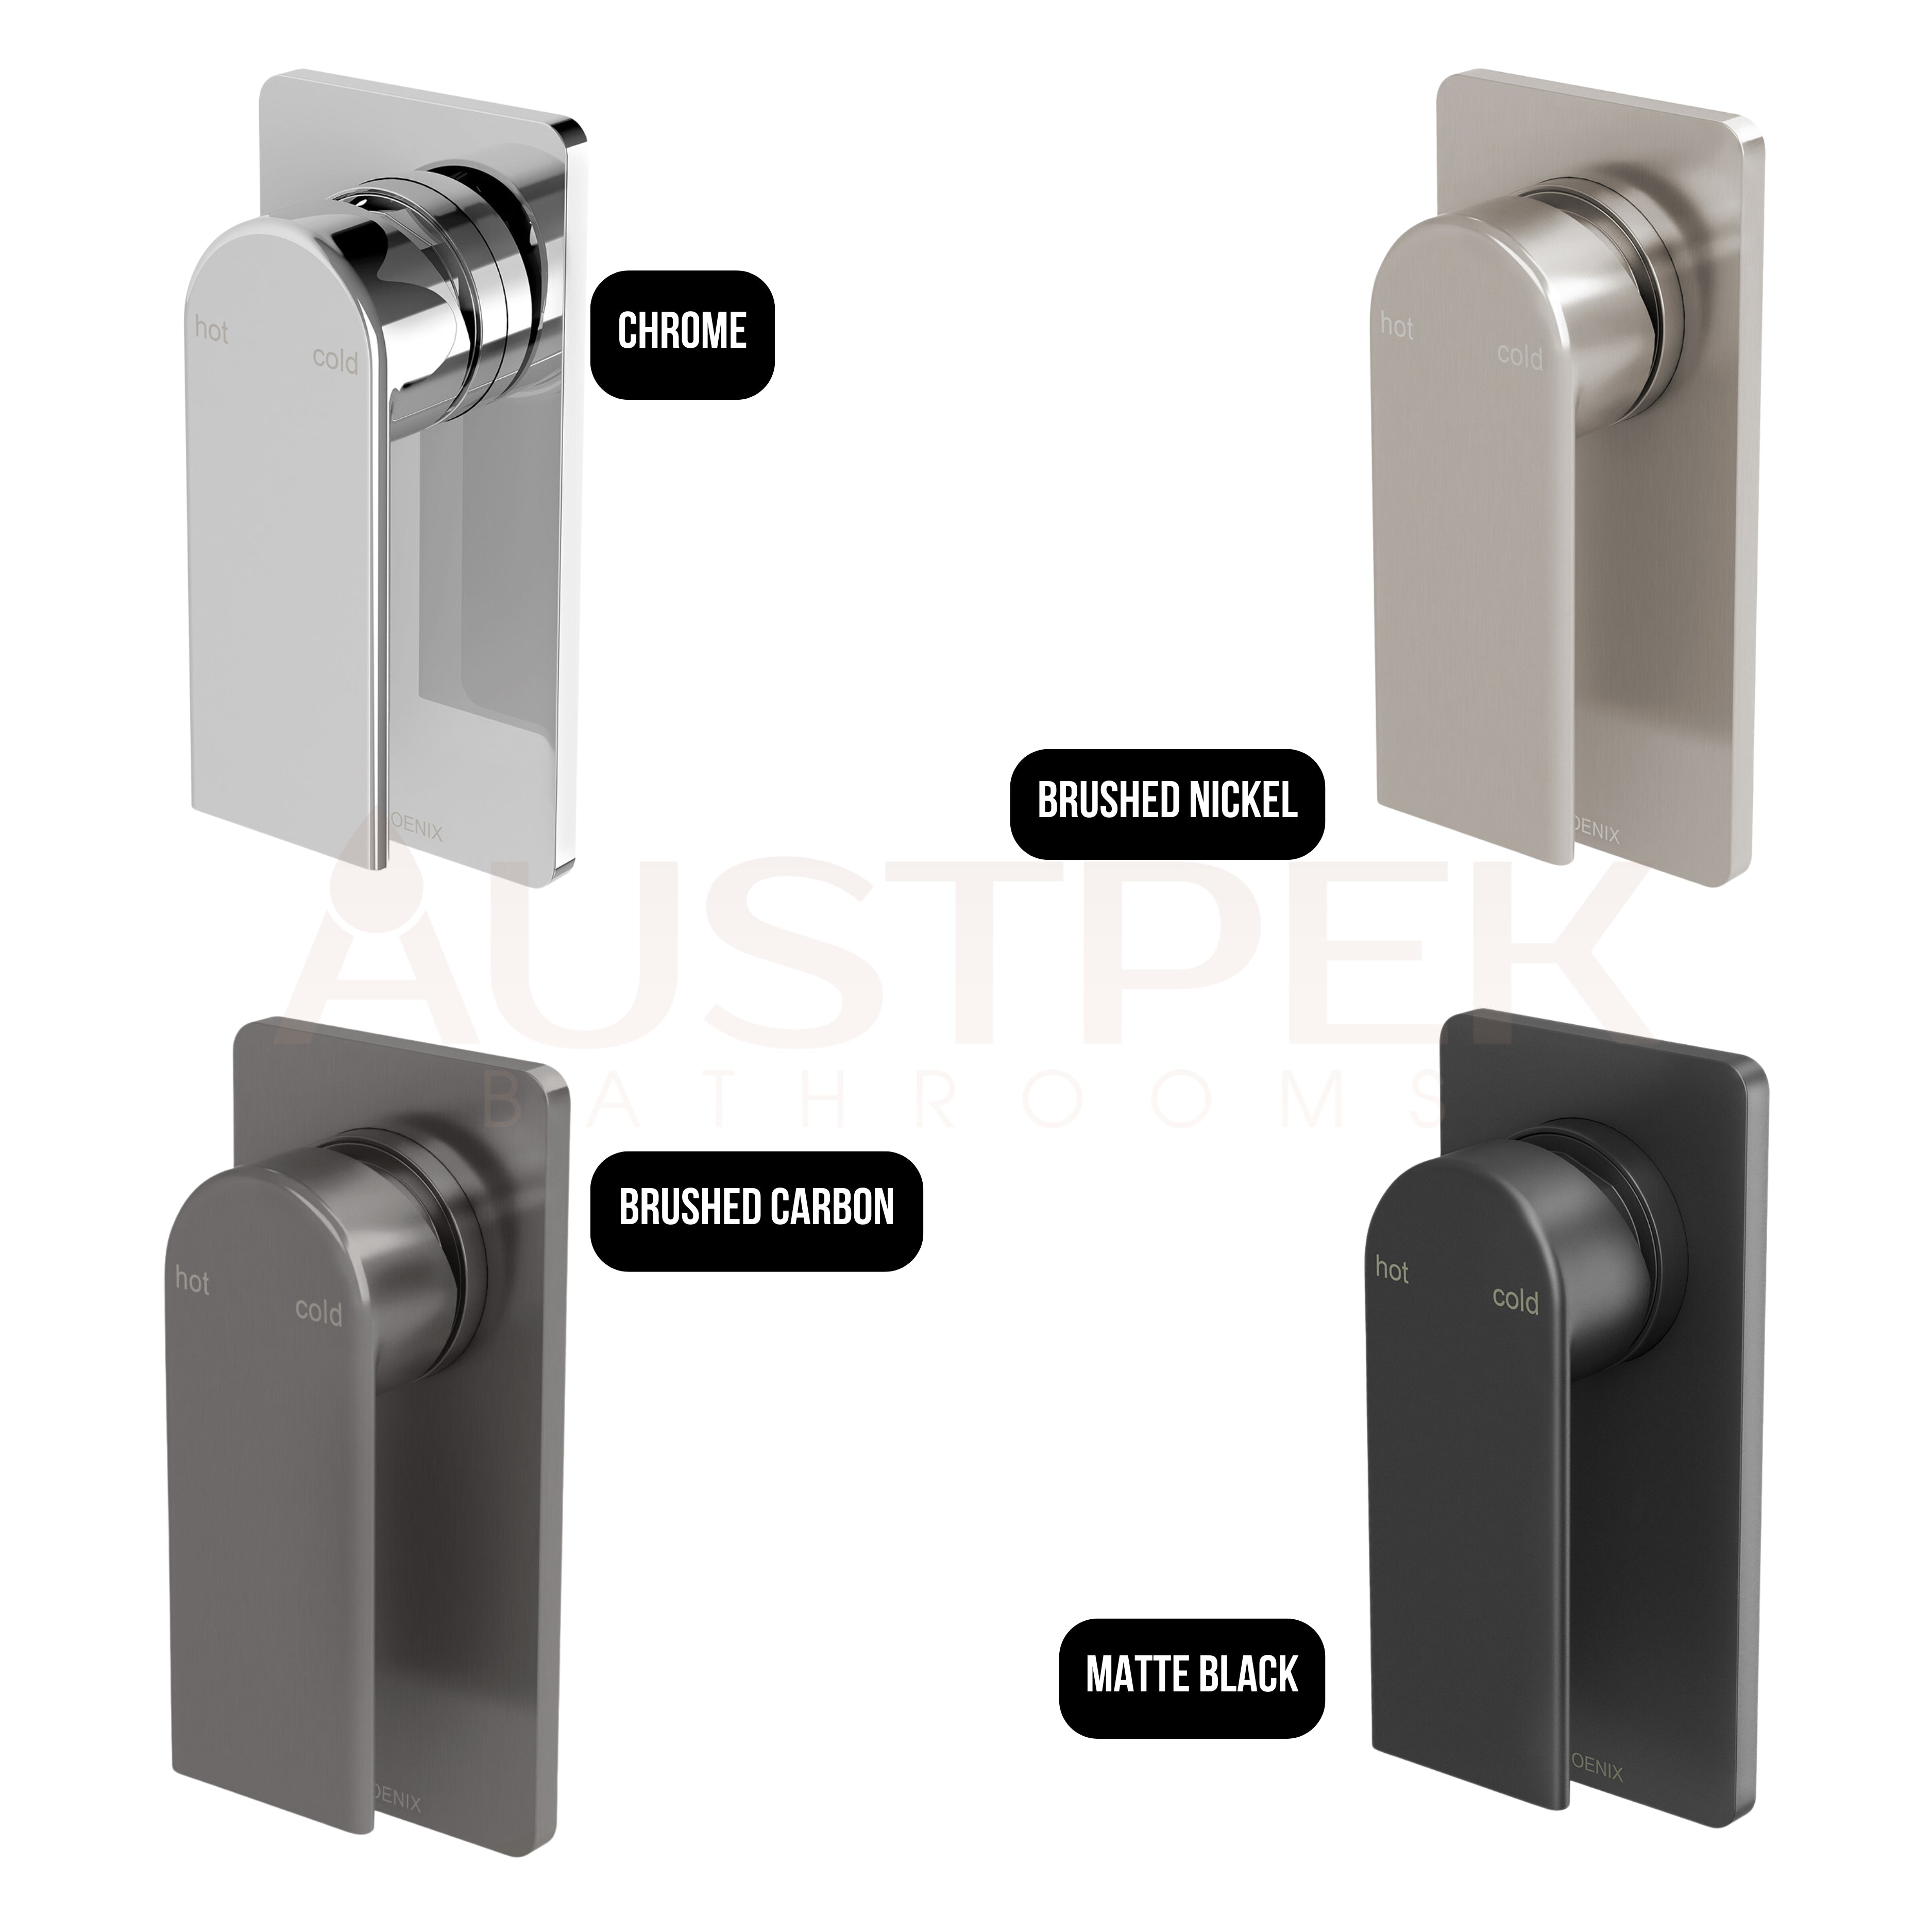 PHOENIX TEEL SWITCHMIX SHOWER / WALL MIXER FIT-OFF AND ROUGH-IN KIT BRUSHED NICKEL